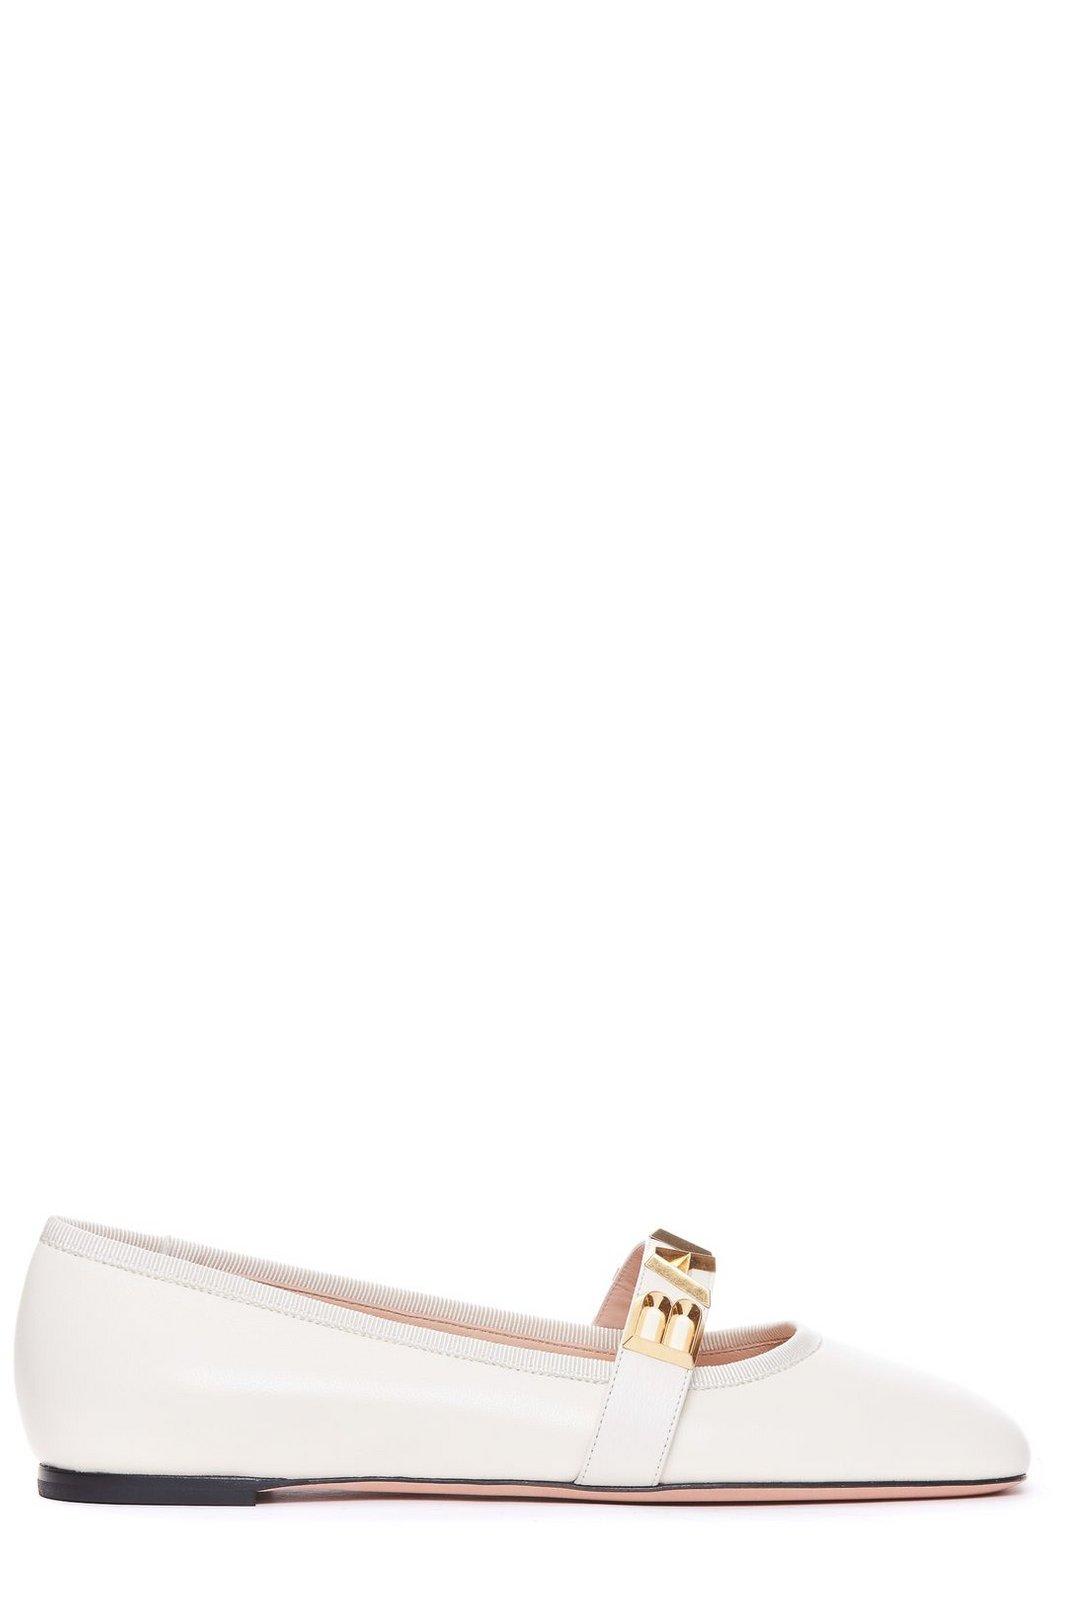 Shop Bally Balby Squared Toe Ballet Flats In White